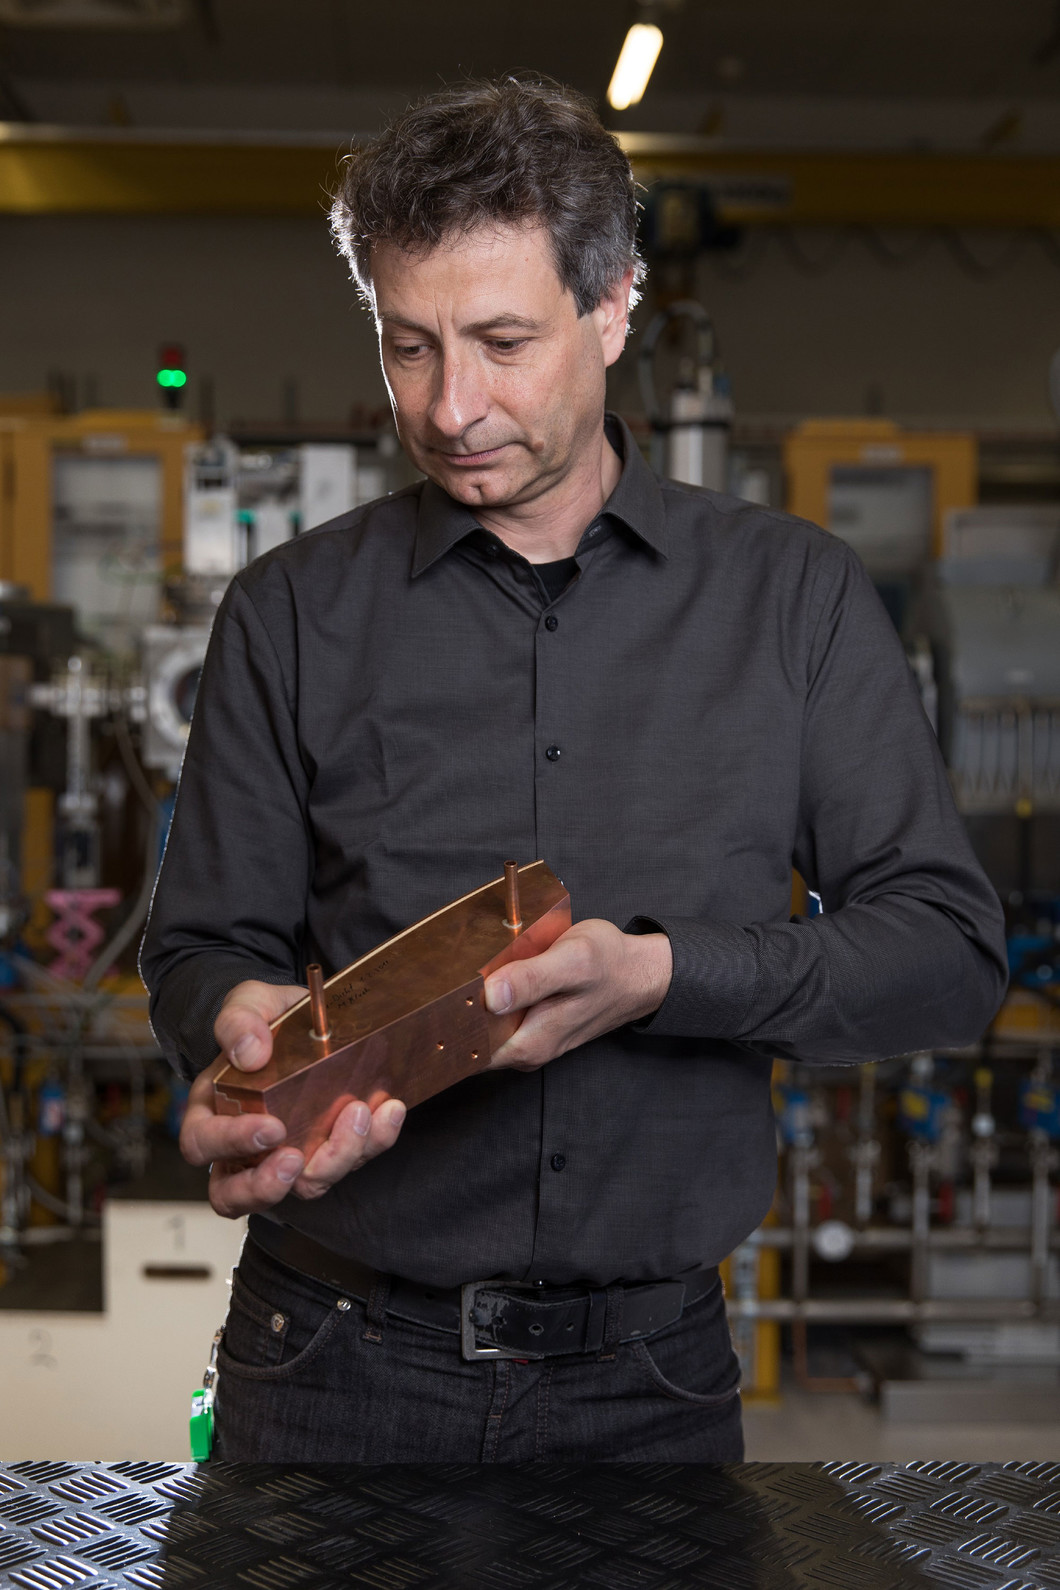 Joachim Grillenberger, responsible for the operation of the proton facility, with a collimator as it is used in Injector 2. (Photo: Paul Scherrer Institute/Mahir Dzambegovic)